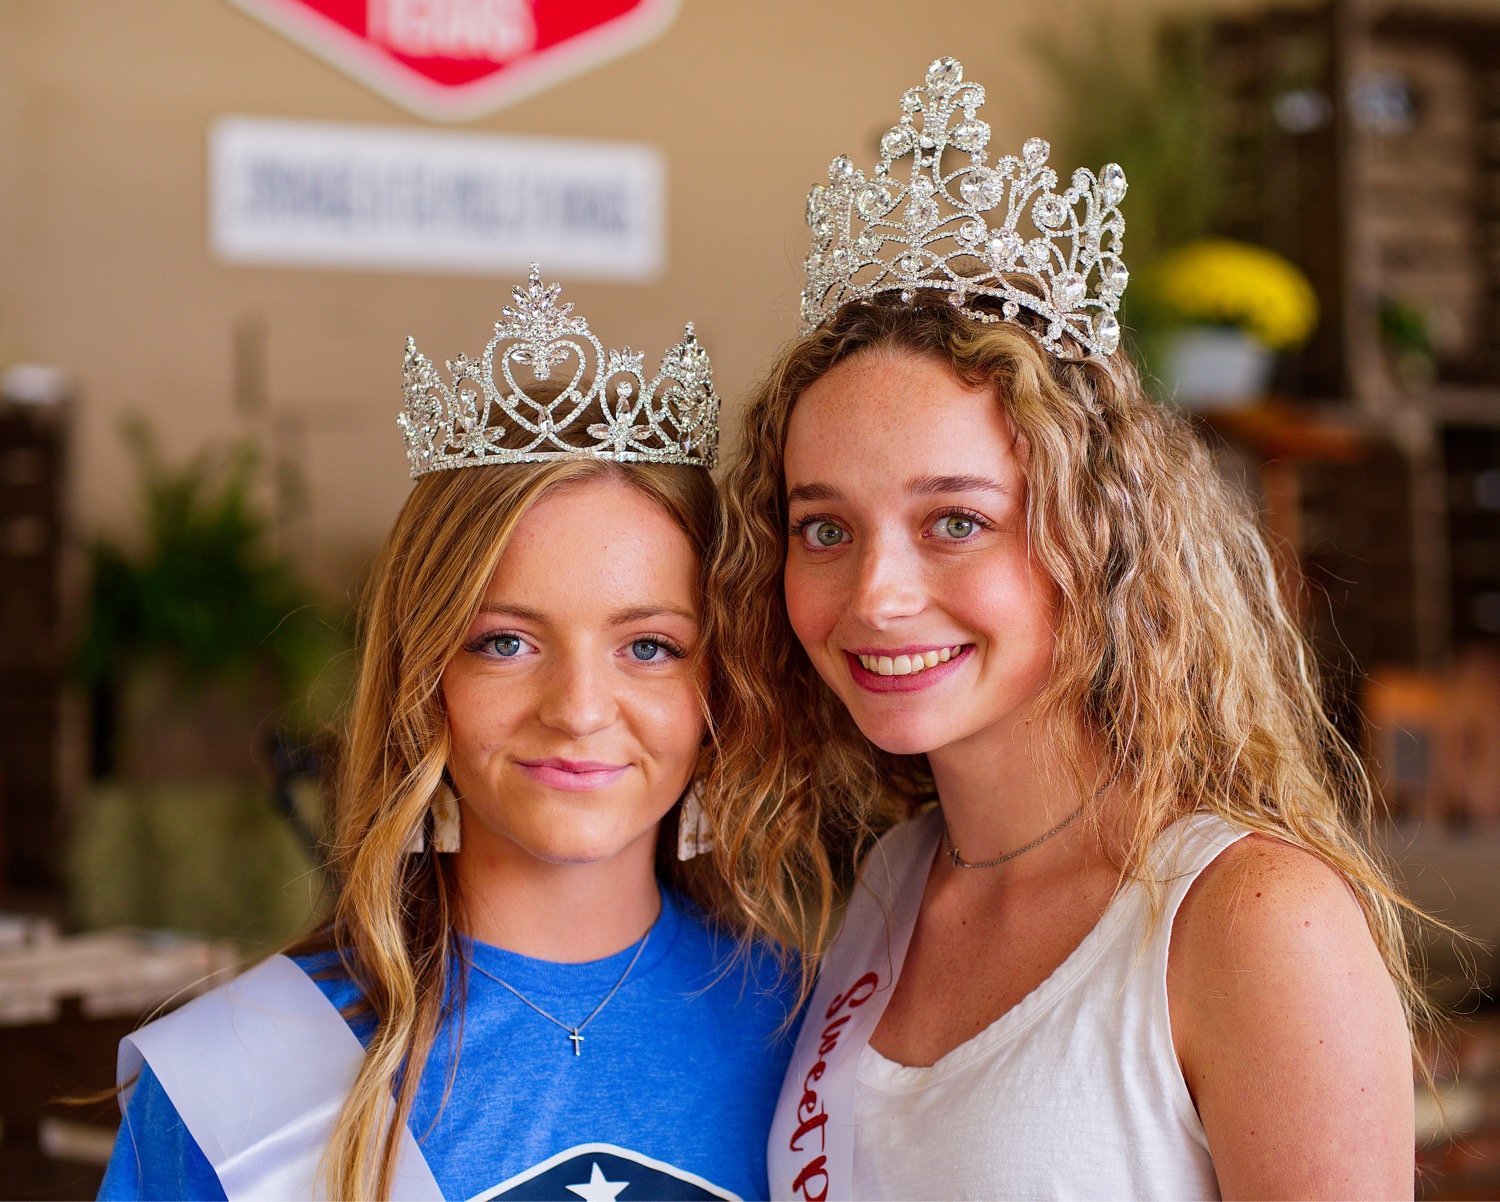 Cacie Lennon, left, was crowned 2022 Golden Sweet Potato Queen by her predecessor, Jade Kruse. [see more sweet moments]